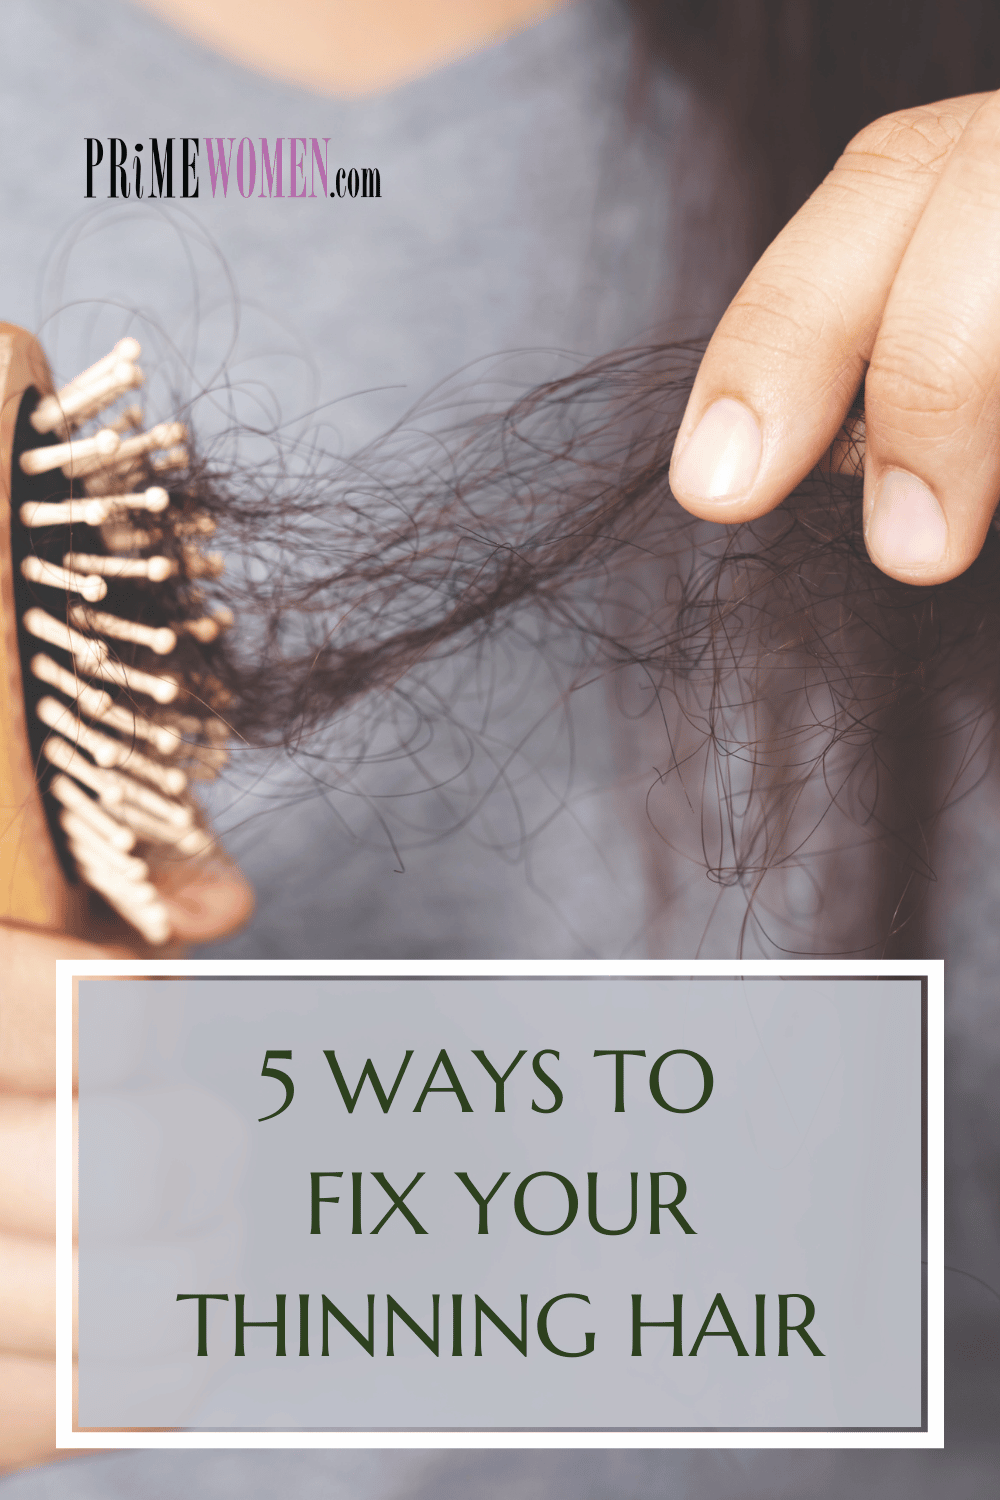 5 Ways to Fix your Thinning hair